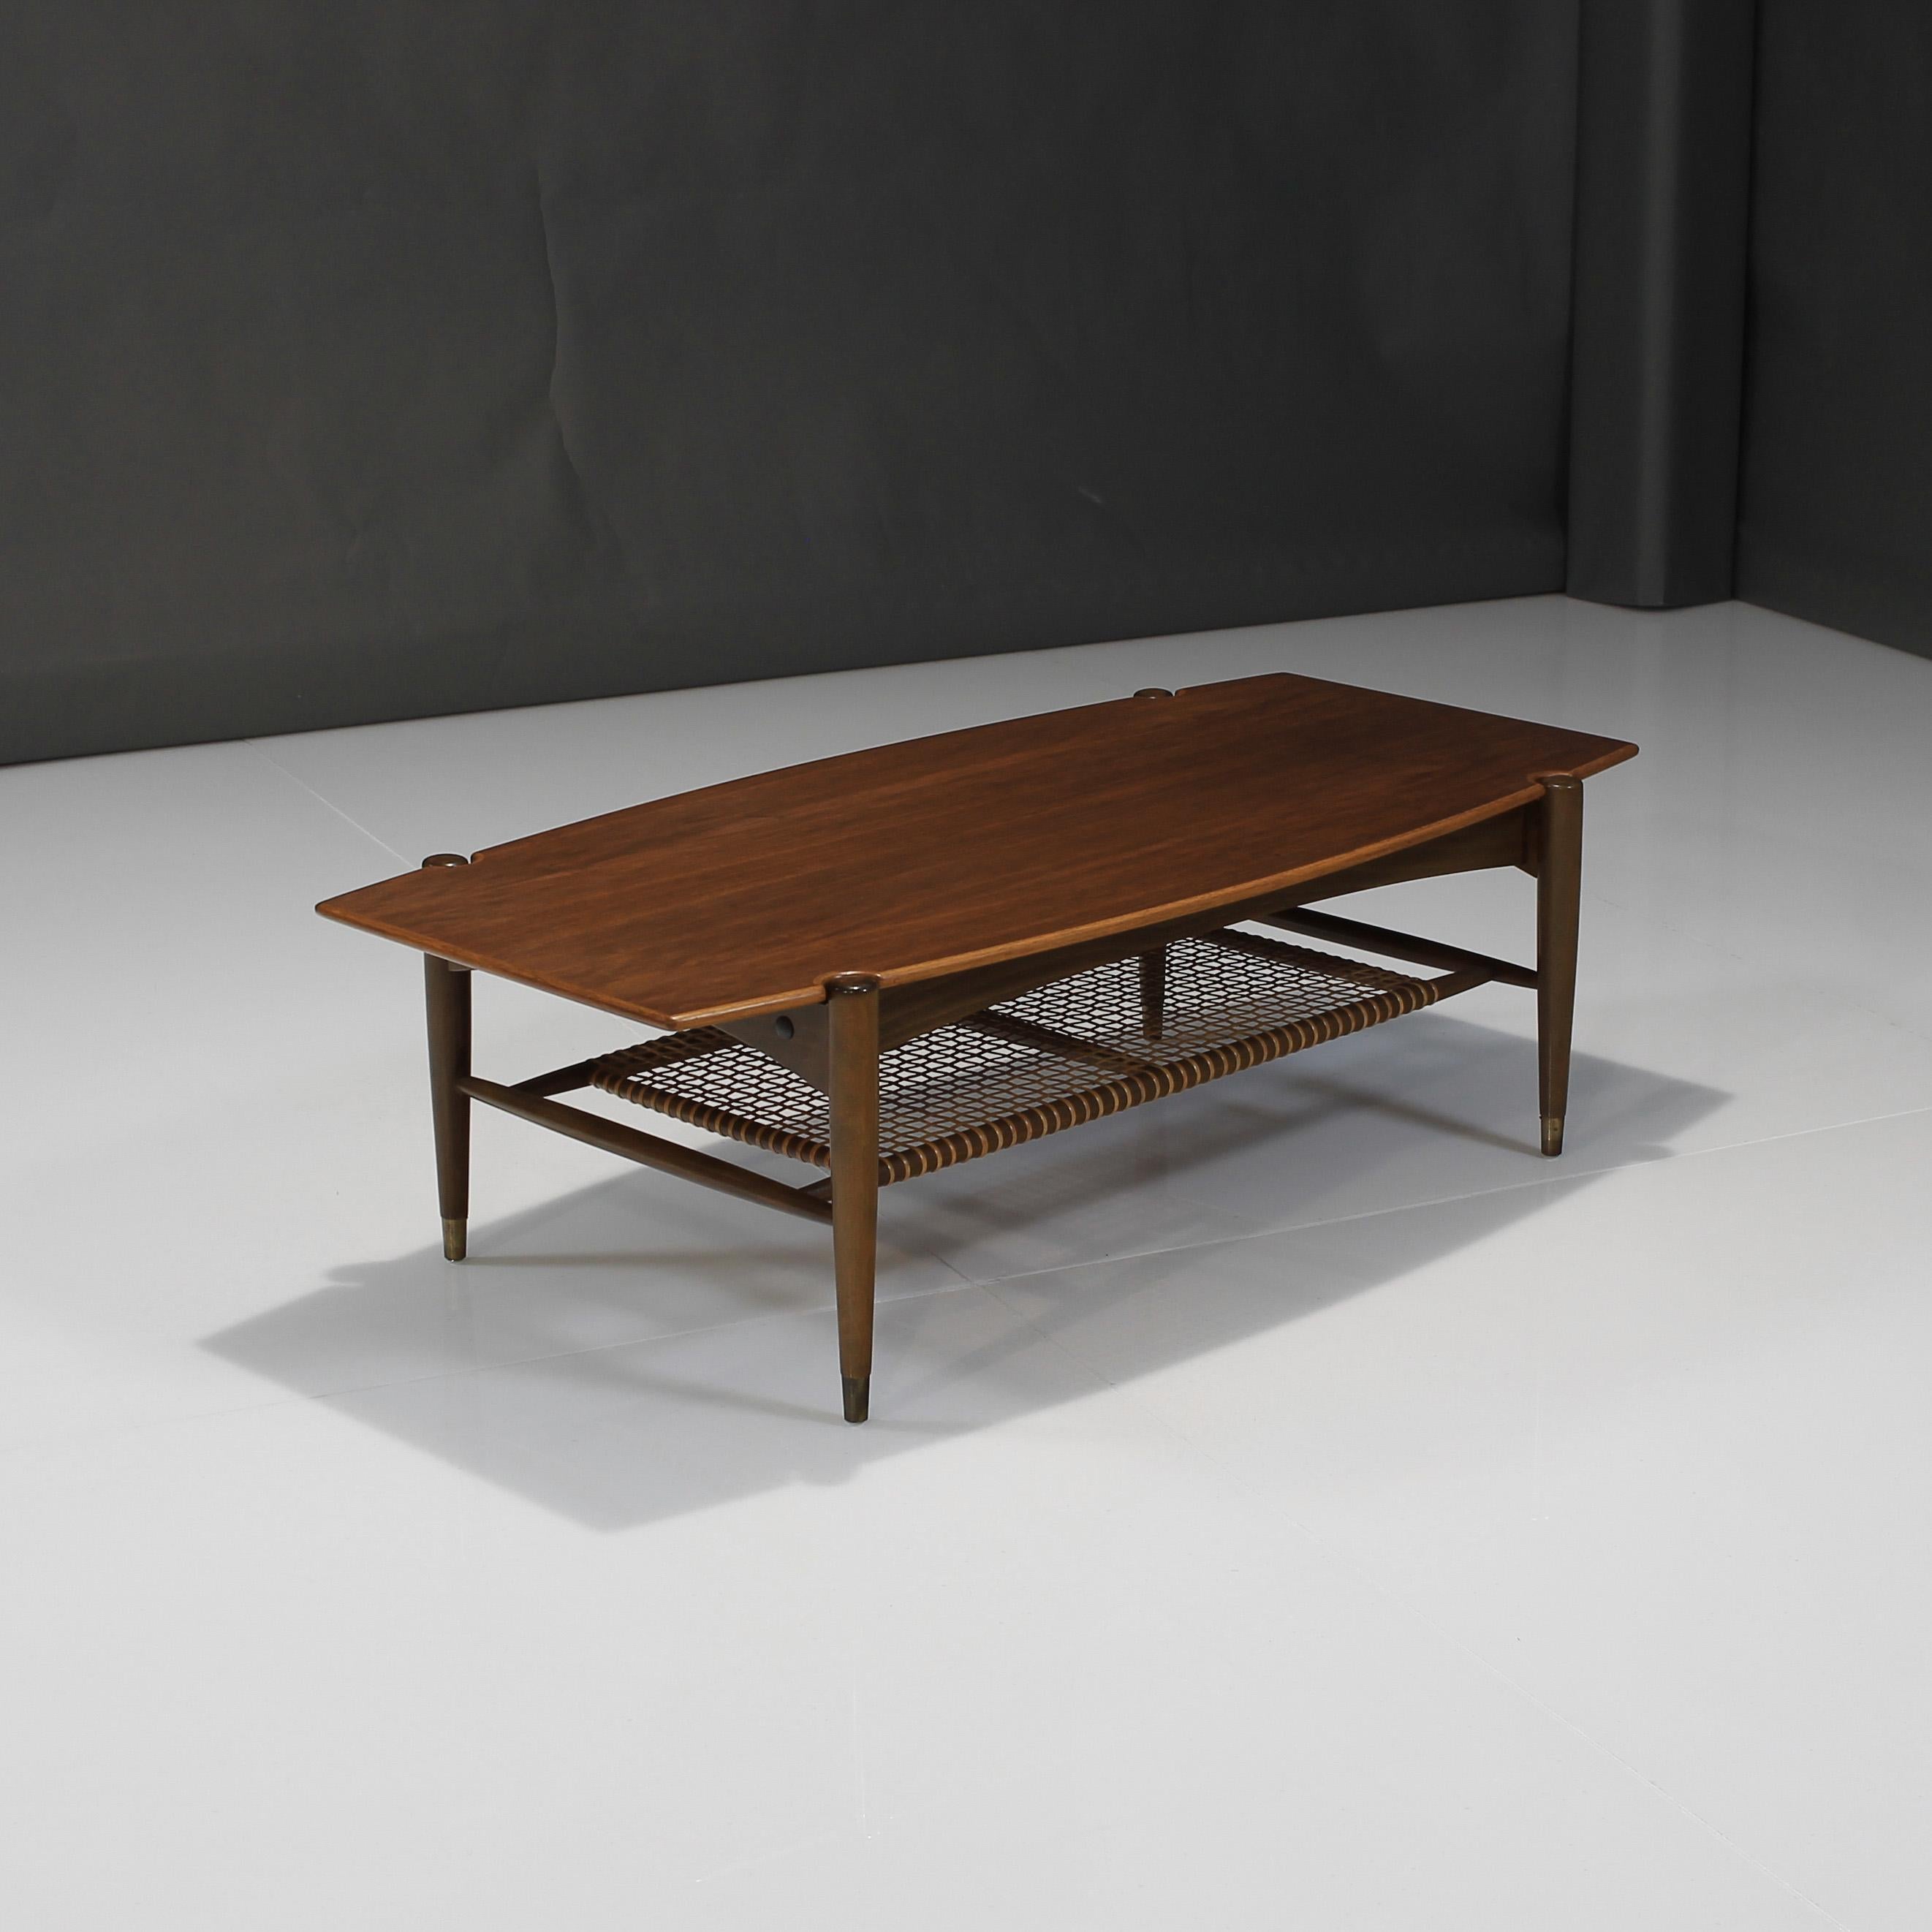 About this Folke Ohlsson coffee table by DUX in teak and cane:

Bring in all of the warmth and character to your living space with this wonderful vintage piece from Sweden. Elevated on tapered legs with aged brass accents and showing off beautiful